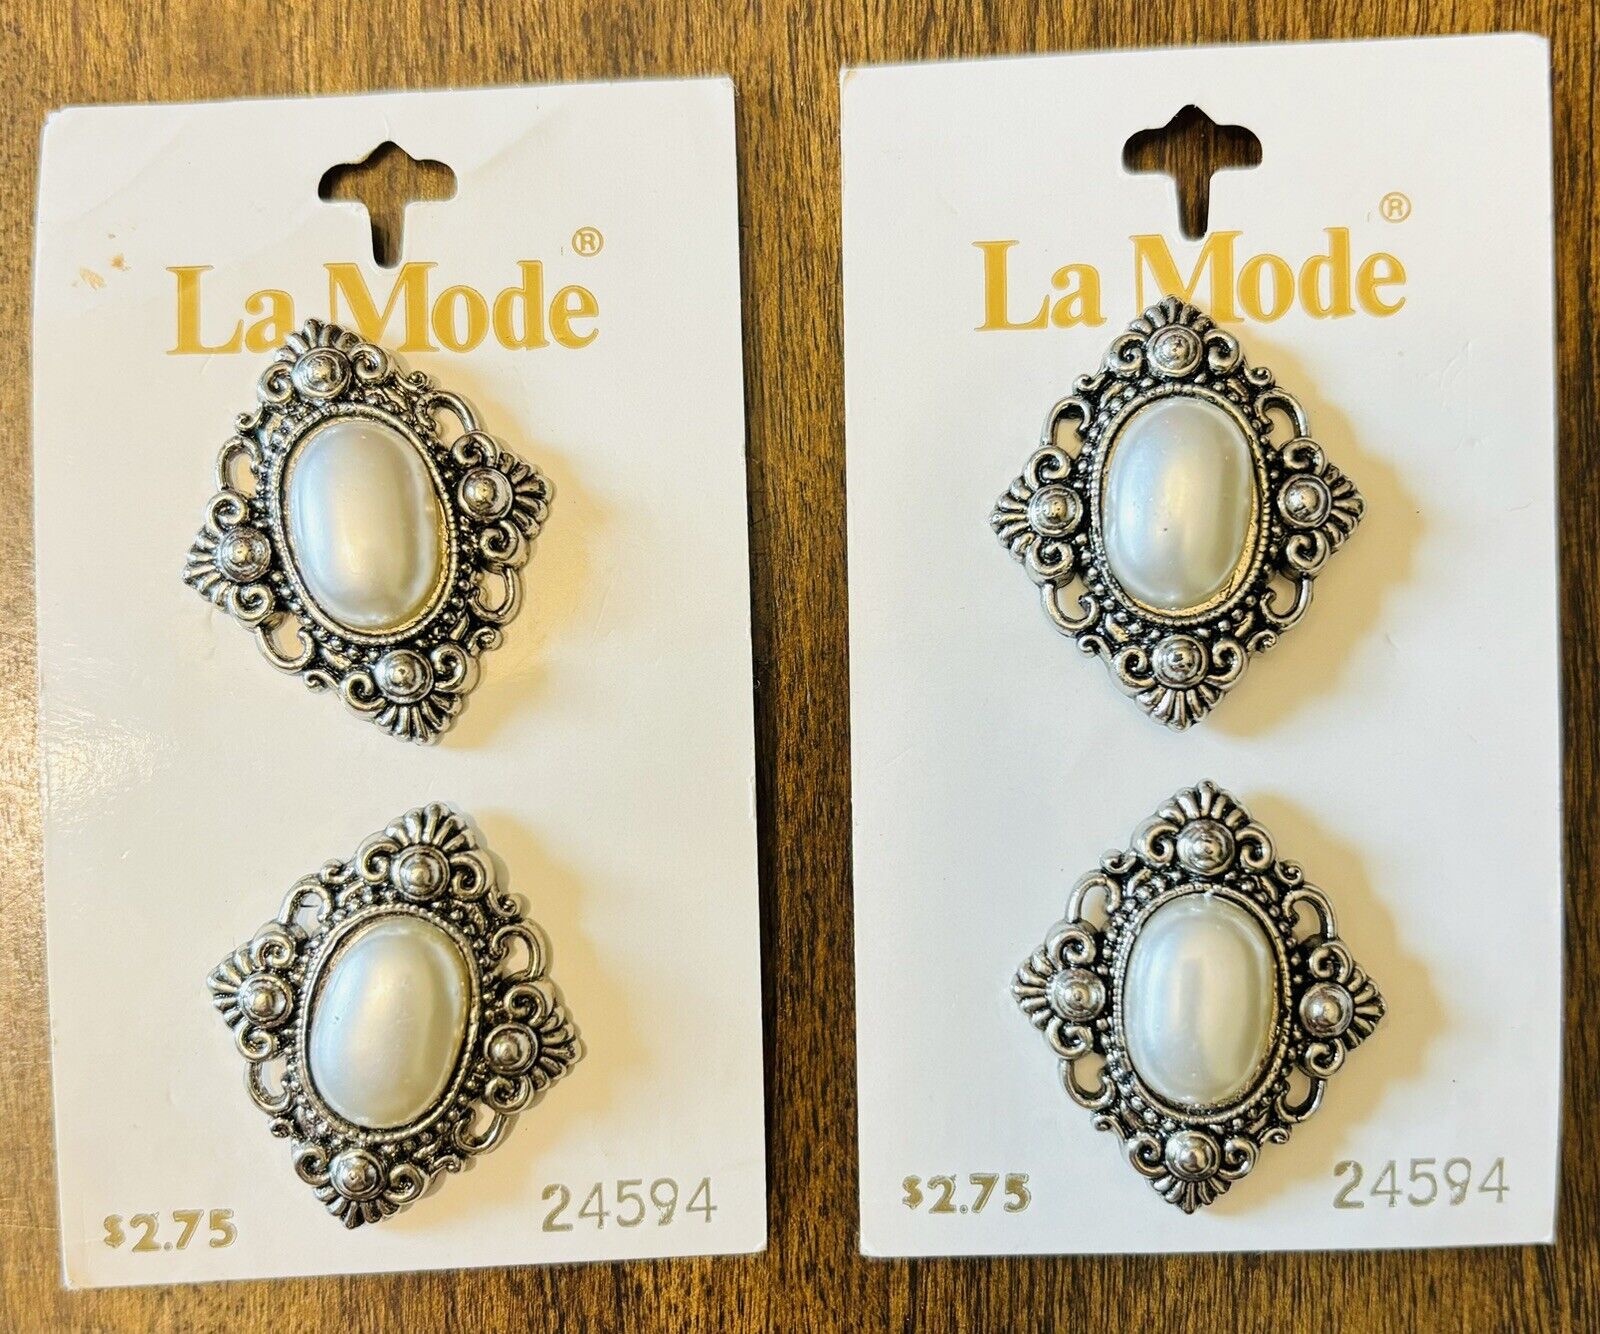 Vintage Antique Silver/Faux Pearl LaMode Buttons Made in Taiwan - Size 1\